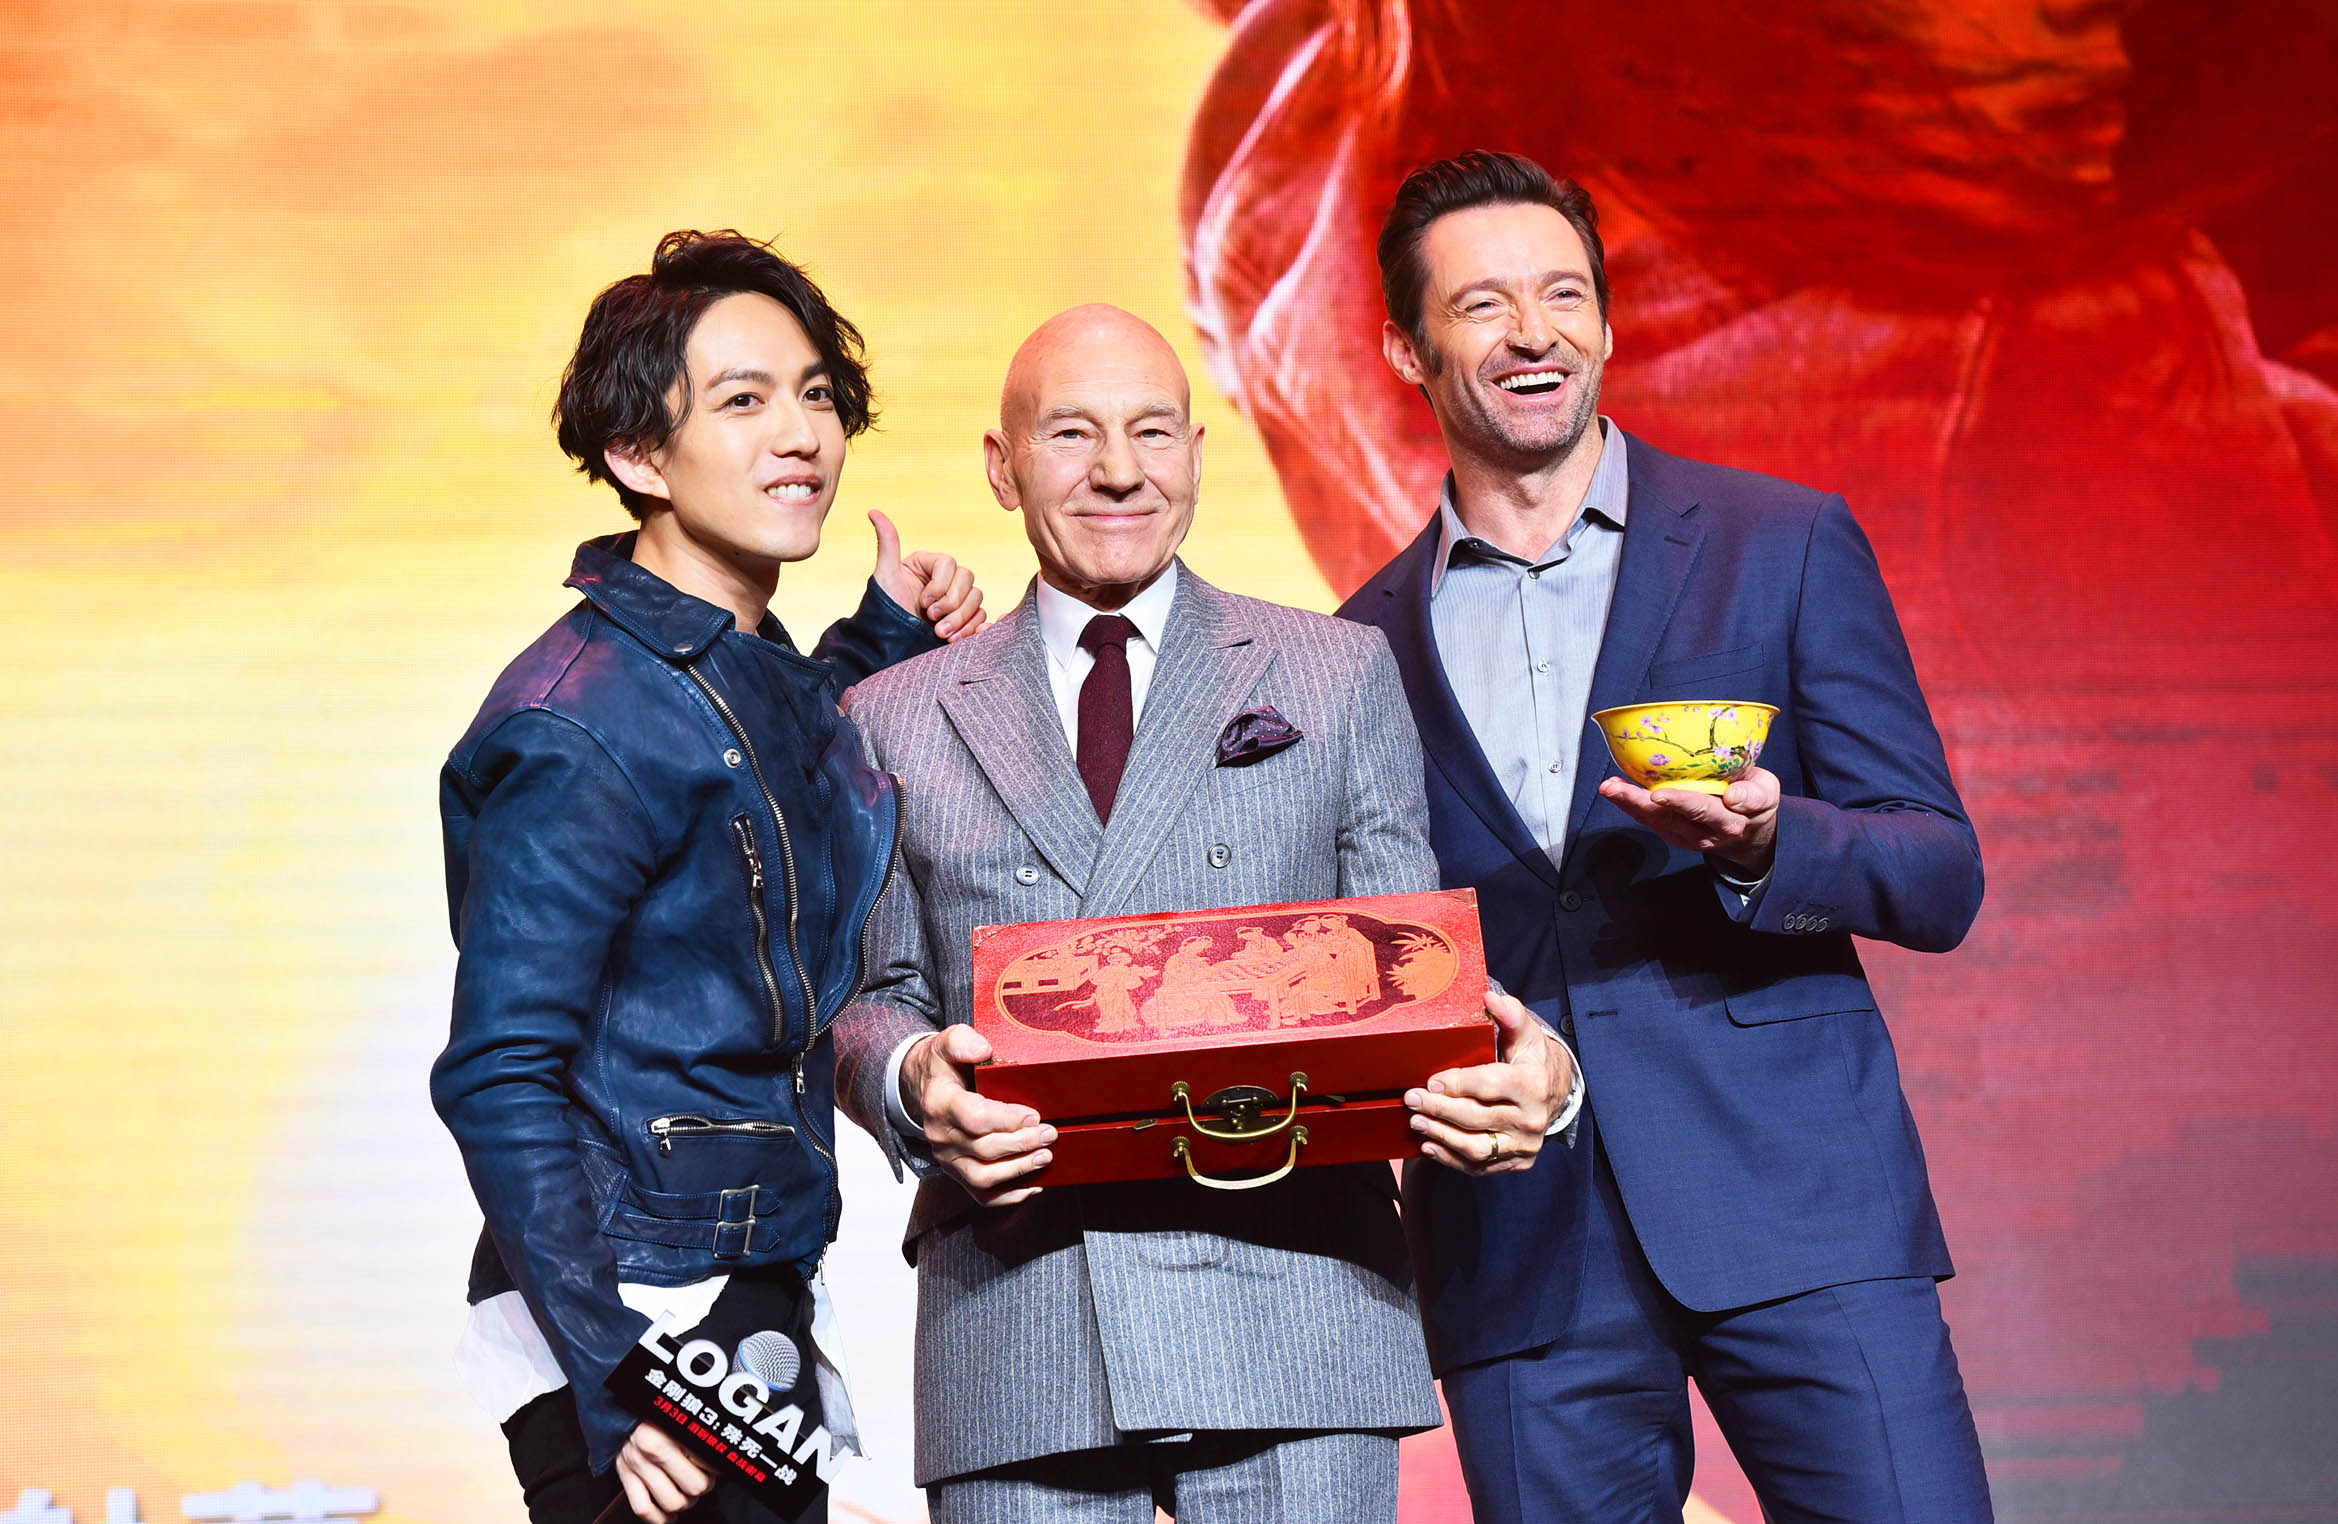 "Wolverine" Hugh Jackman (right), Patrick Stewart (center) pose together for a picture with a young Chinese singer who's a fan (left) on Wednesday afternoon, March 1, 2017, at a promotional event in Beijing held for 'Logan', the last film in the "Wolverine" franchise. [Photo provided to China Plus]